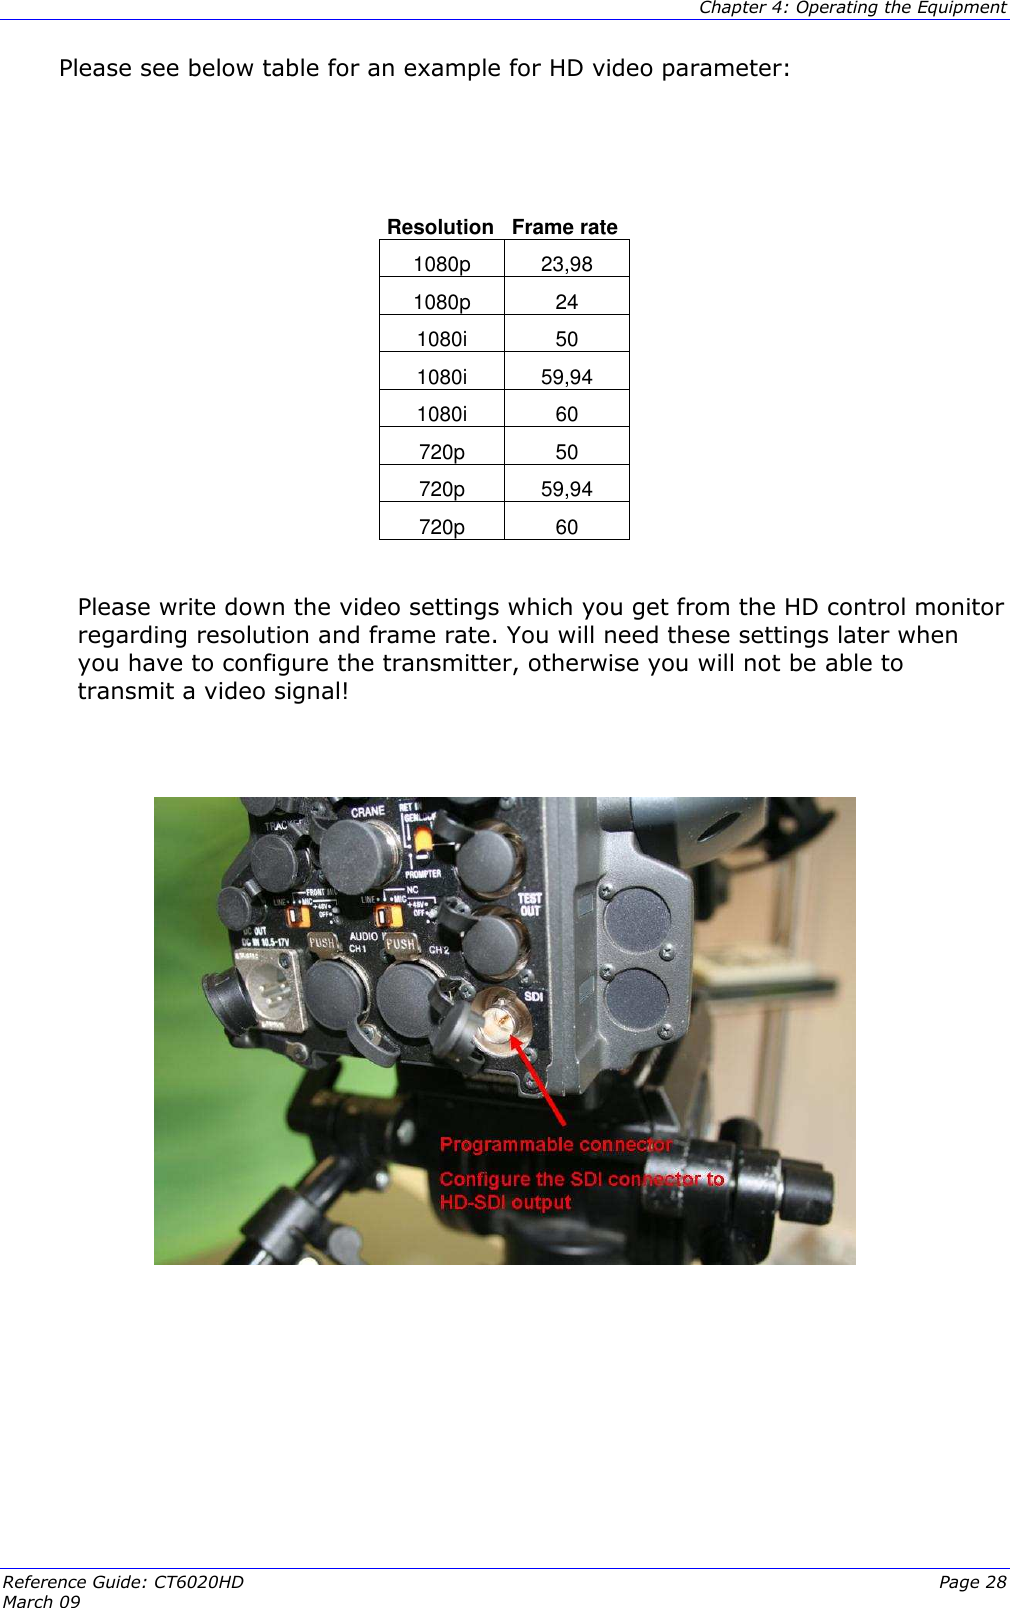  Chapter 4: Operating the Equipment Reference Guide: CT6020HD  Page 28 March 09   Please see below table for an example for HD video parameter:    Resolution Frame rate 1080p  23,98 1080p  24 1080i  50 1080i  59,94 1080i  60 720p  50 720p  59,94 720p  60  Please write down the video settings which you get from the HD control monitor regarding resolution and frame rate. You will need these settings later when you have to configure the transmitter, otherwise you will not be able to transmit a video signal!            